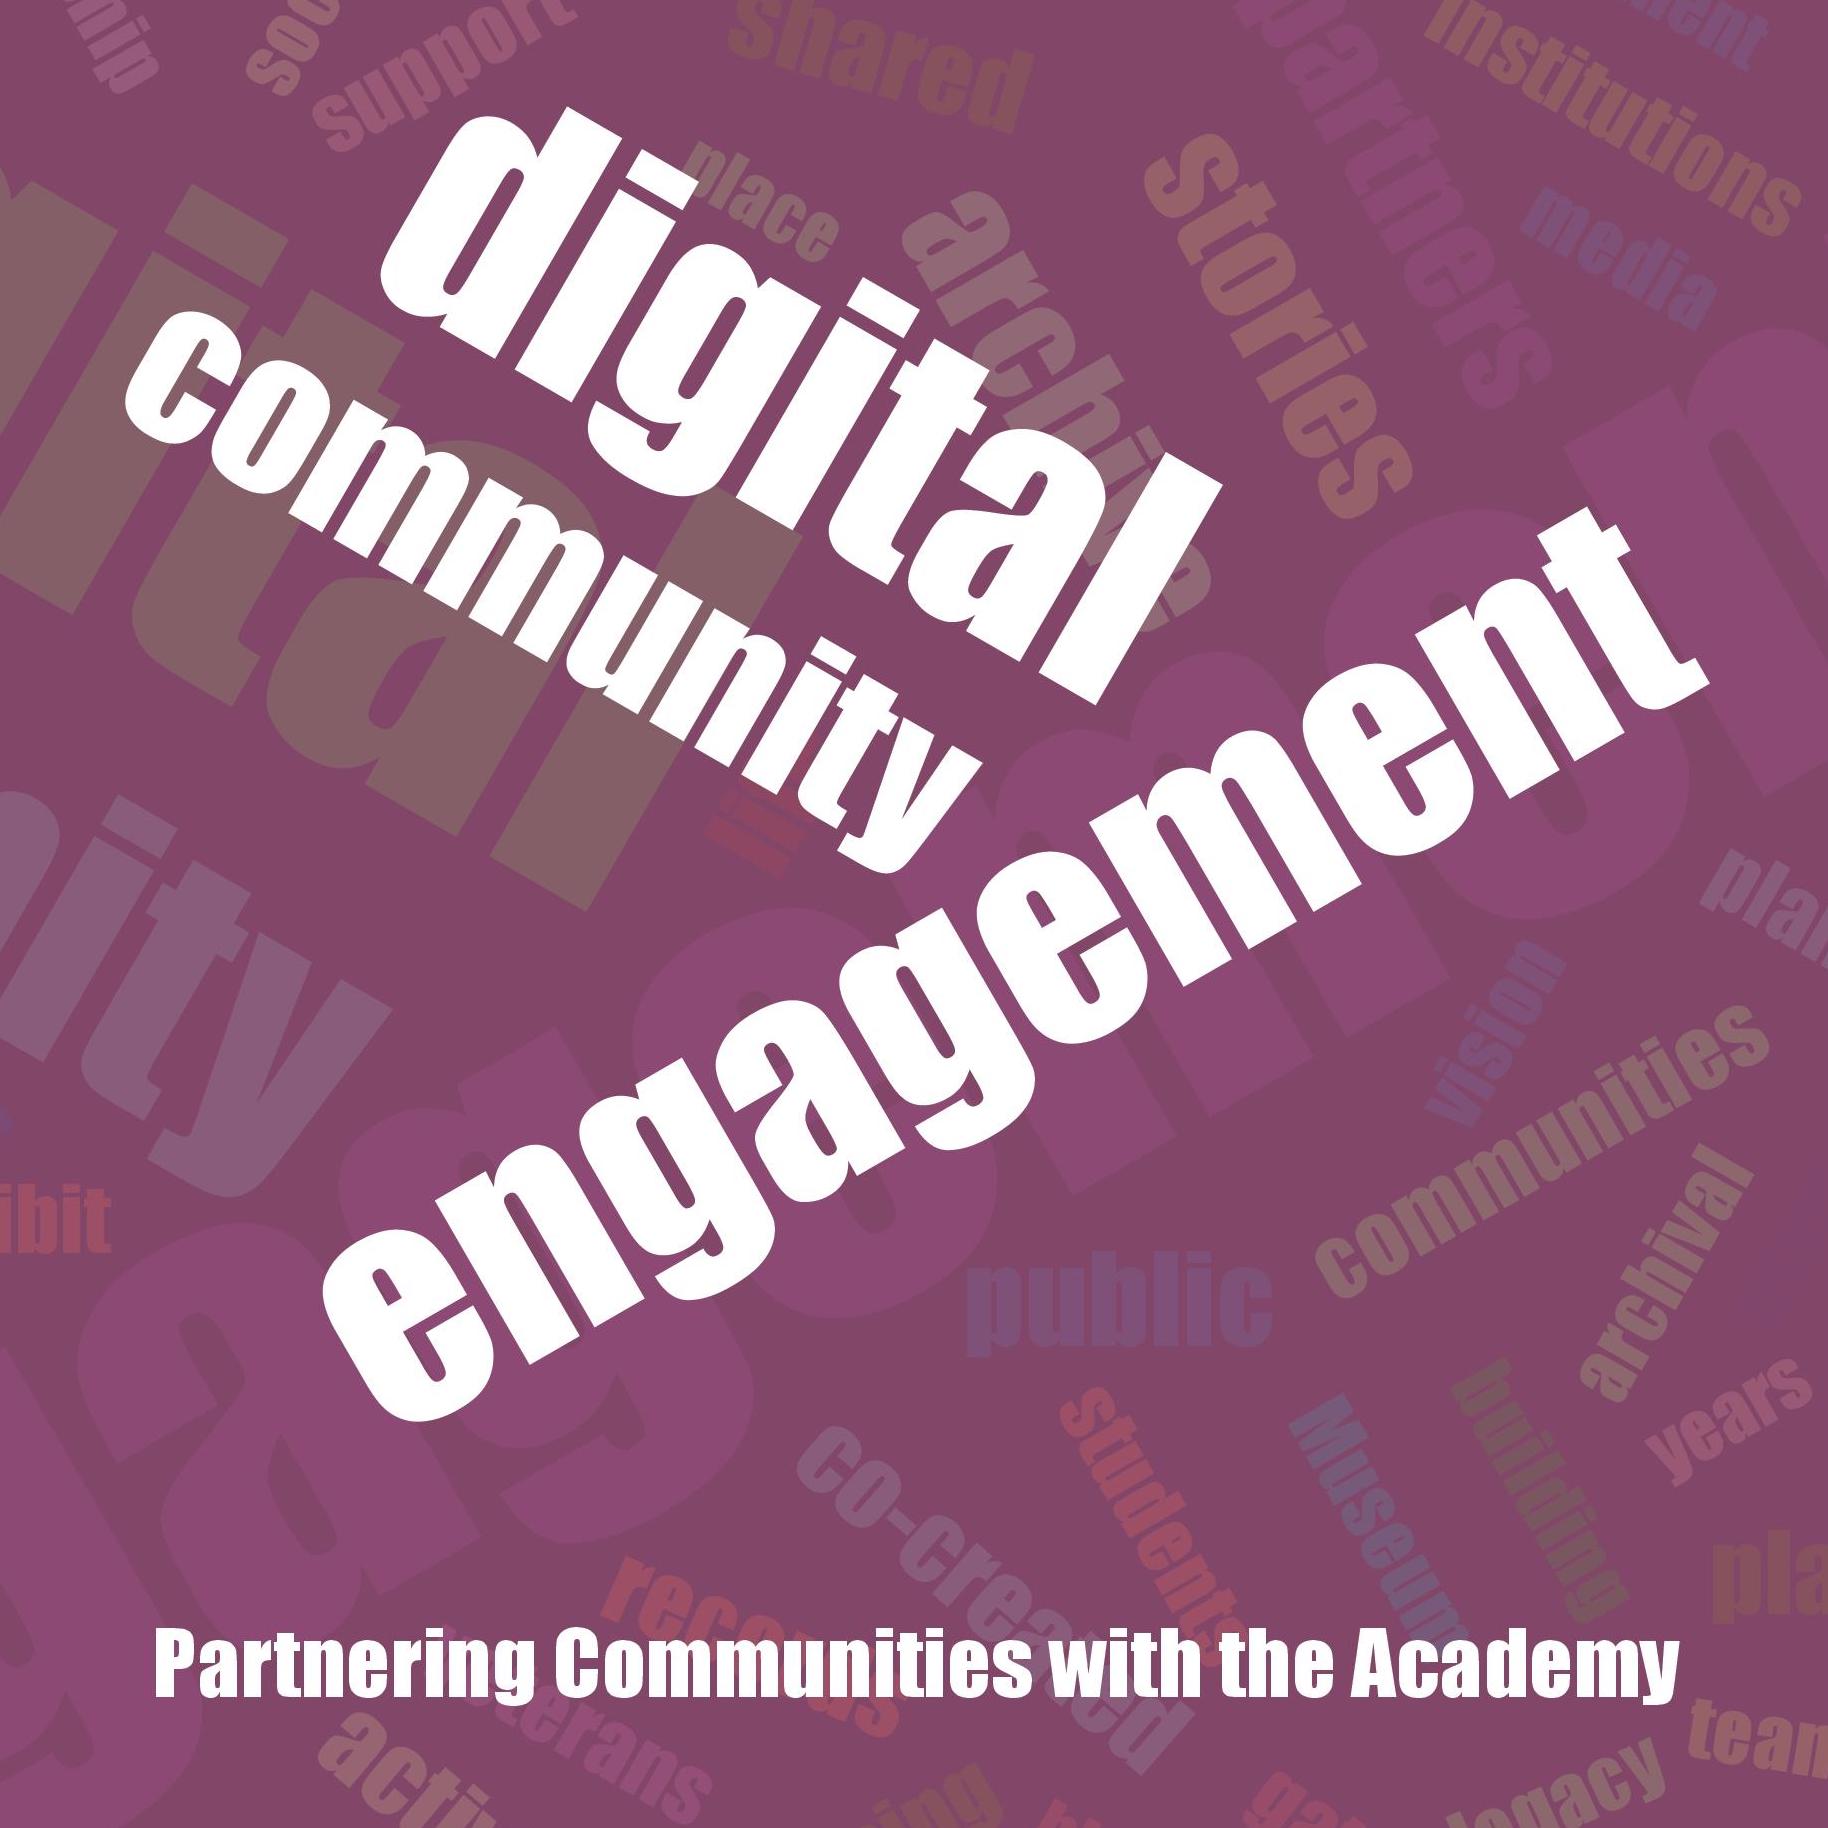 purple book cover for digital community engagement. graphic is a word cloud